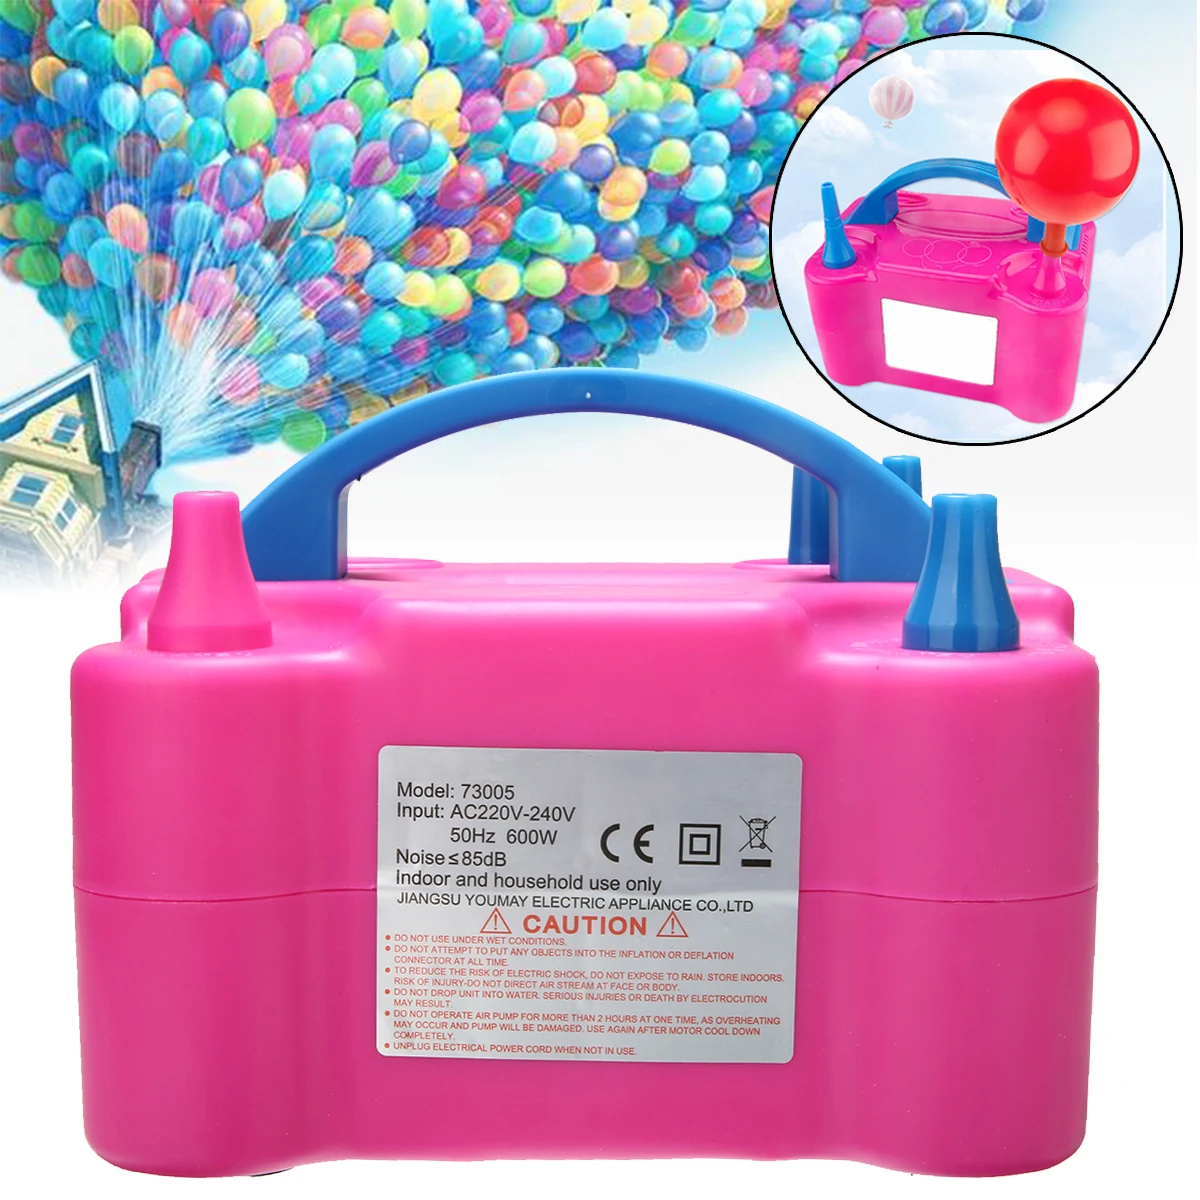 

Portable Electric Balloon Inflator Pump EU Plug Double Hole Nozzle Air Compressor Inflatable Air Blower 600W